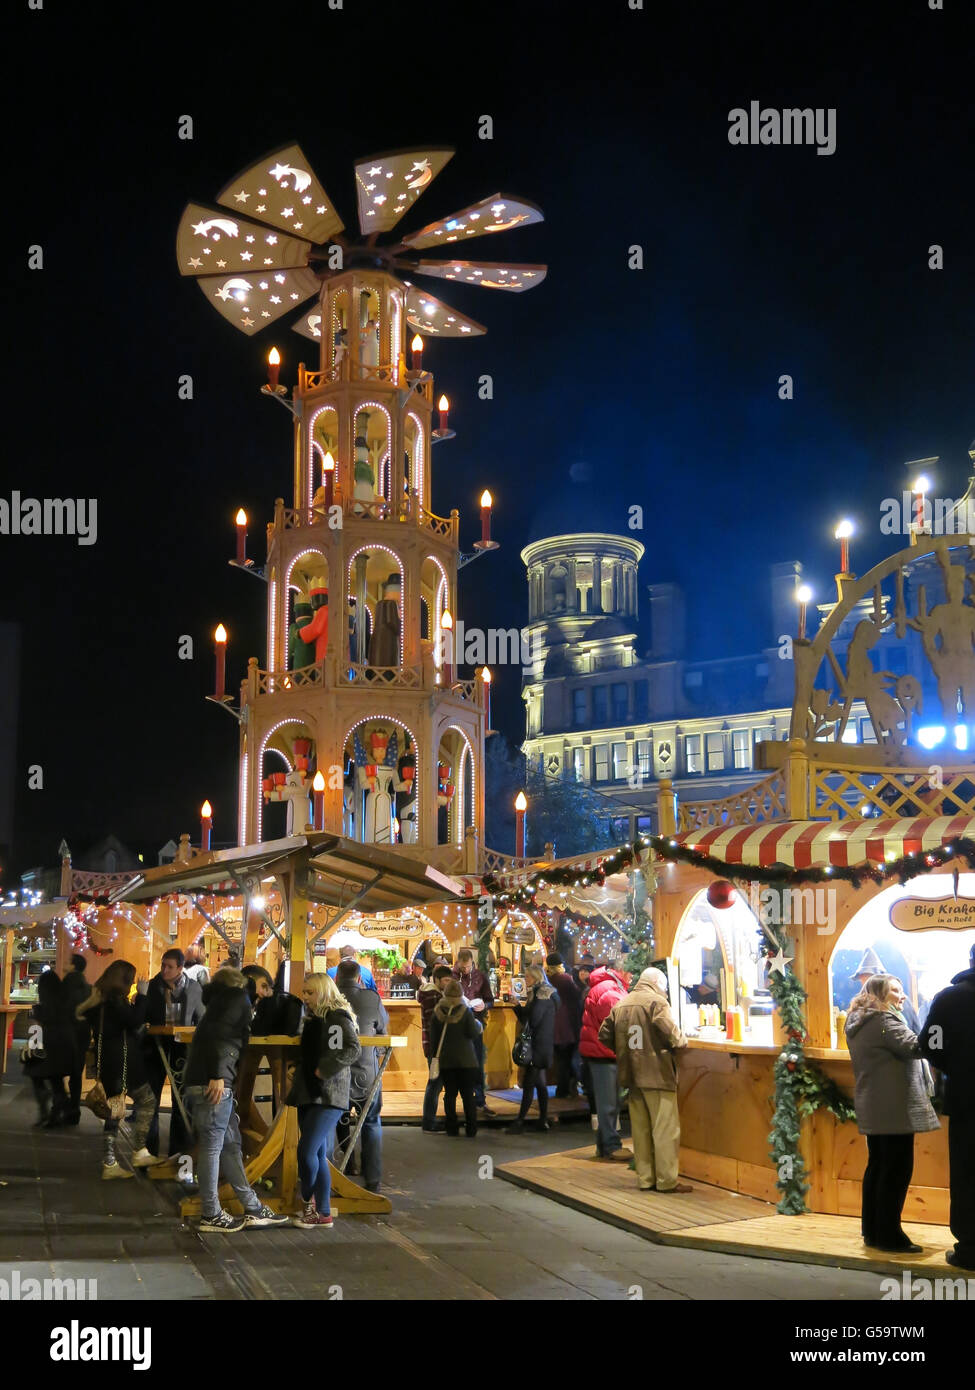 Night scene with people on Christmas Market in Manchester, England, United Kingdom Stock Photo